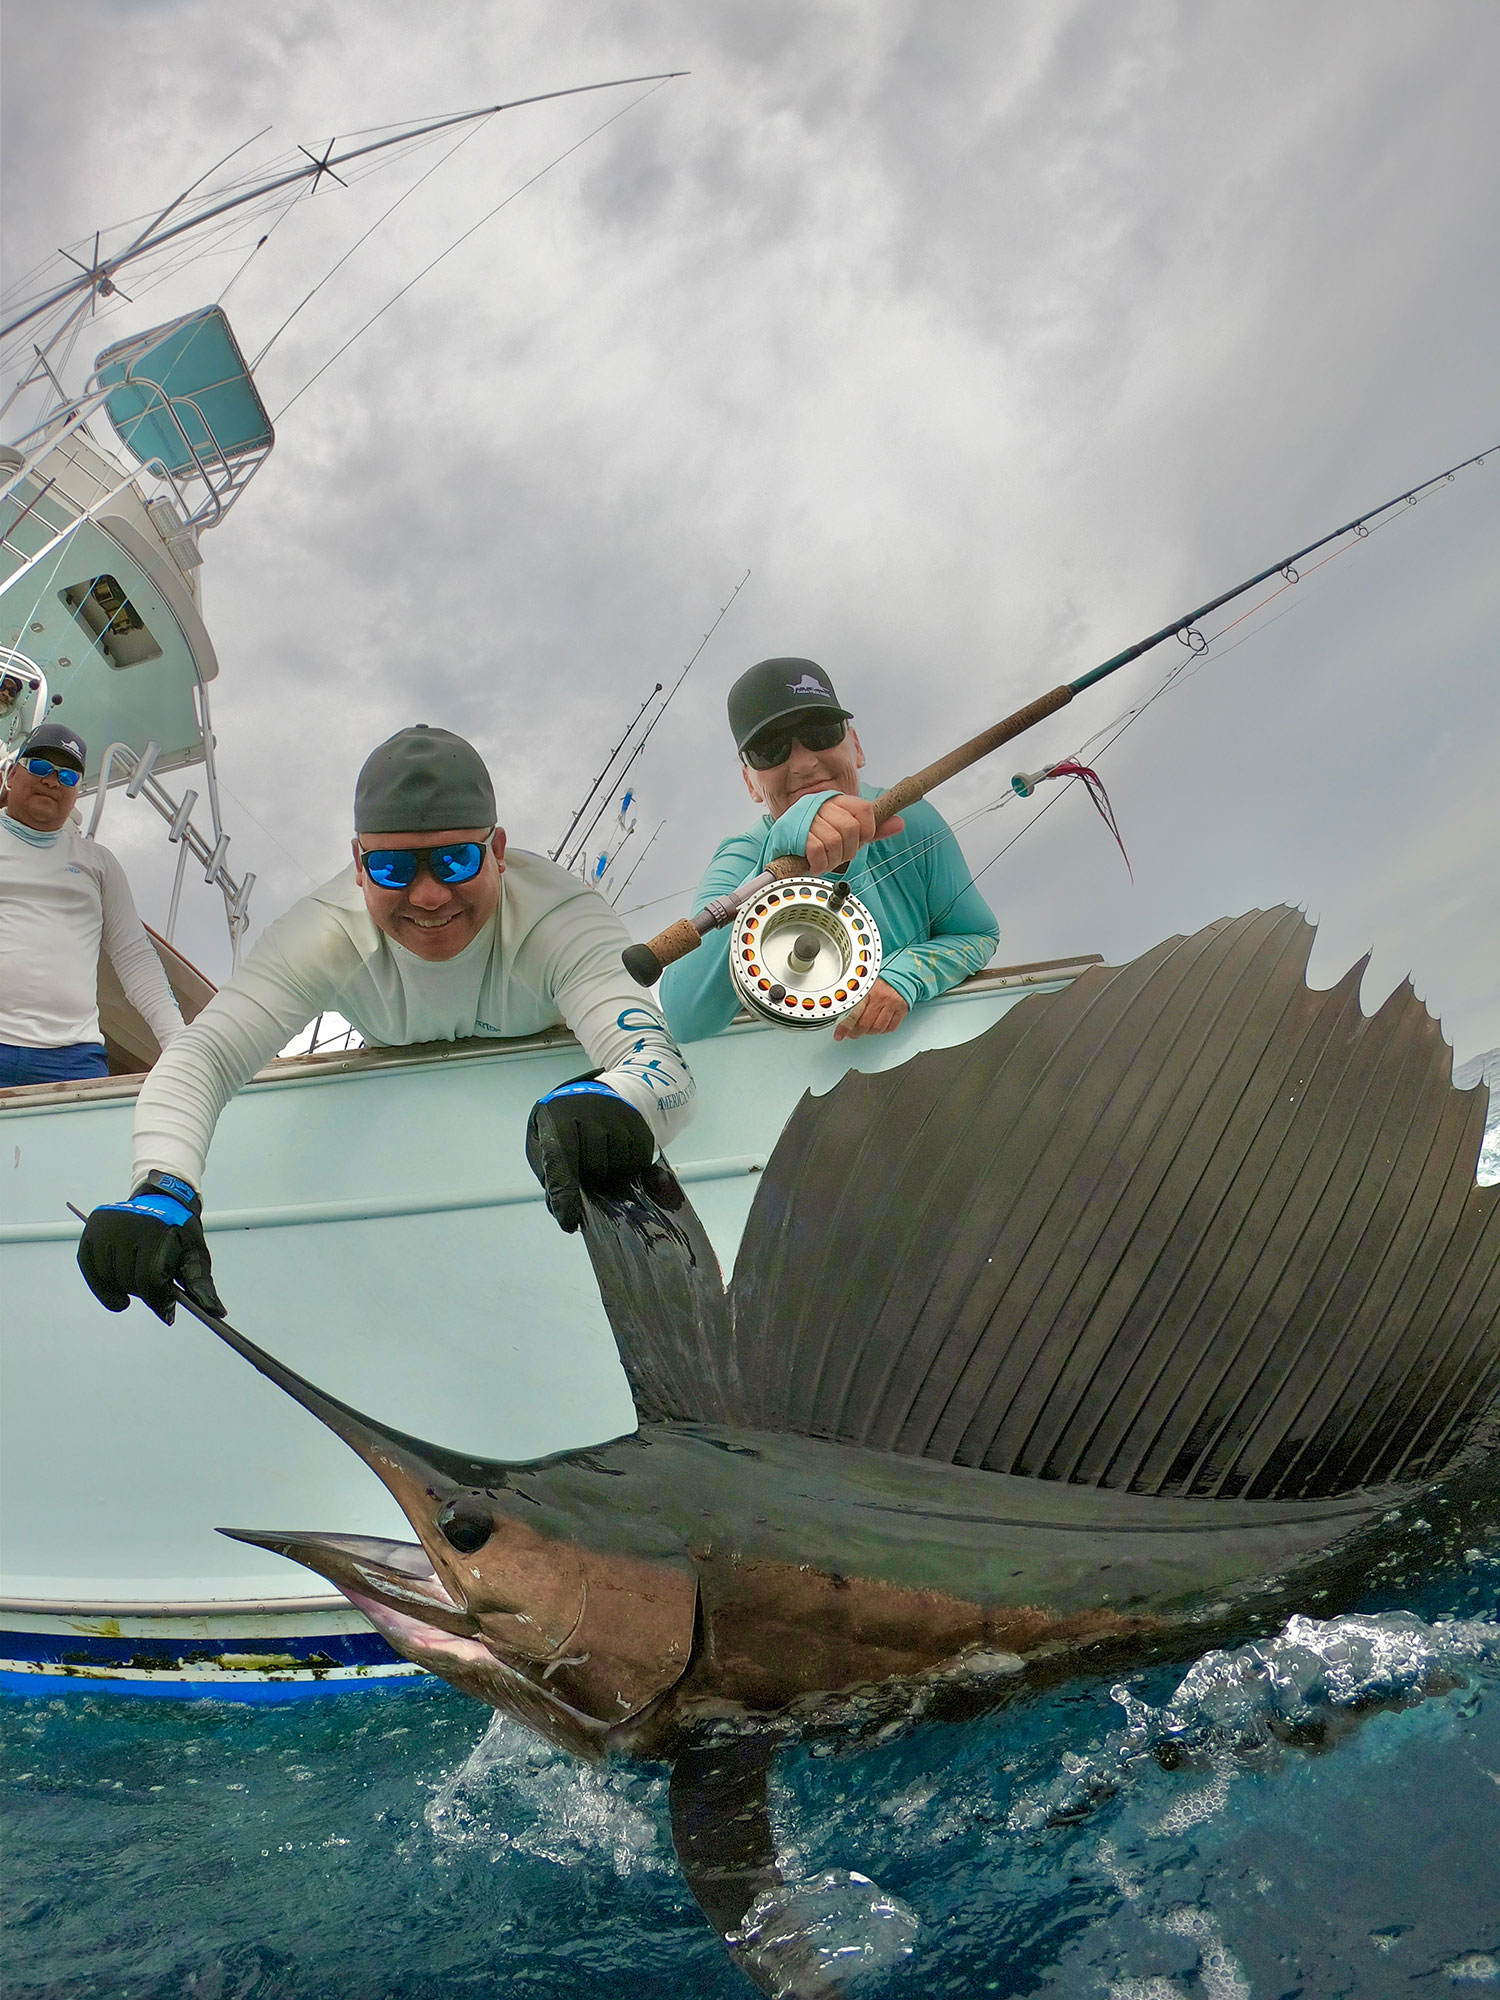 Capt. Jen Copeland pulling a large sailfish boatside with the help of a crewmate.